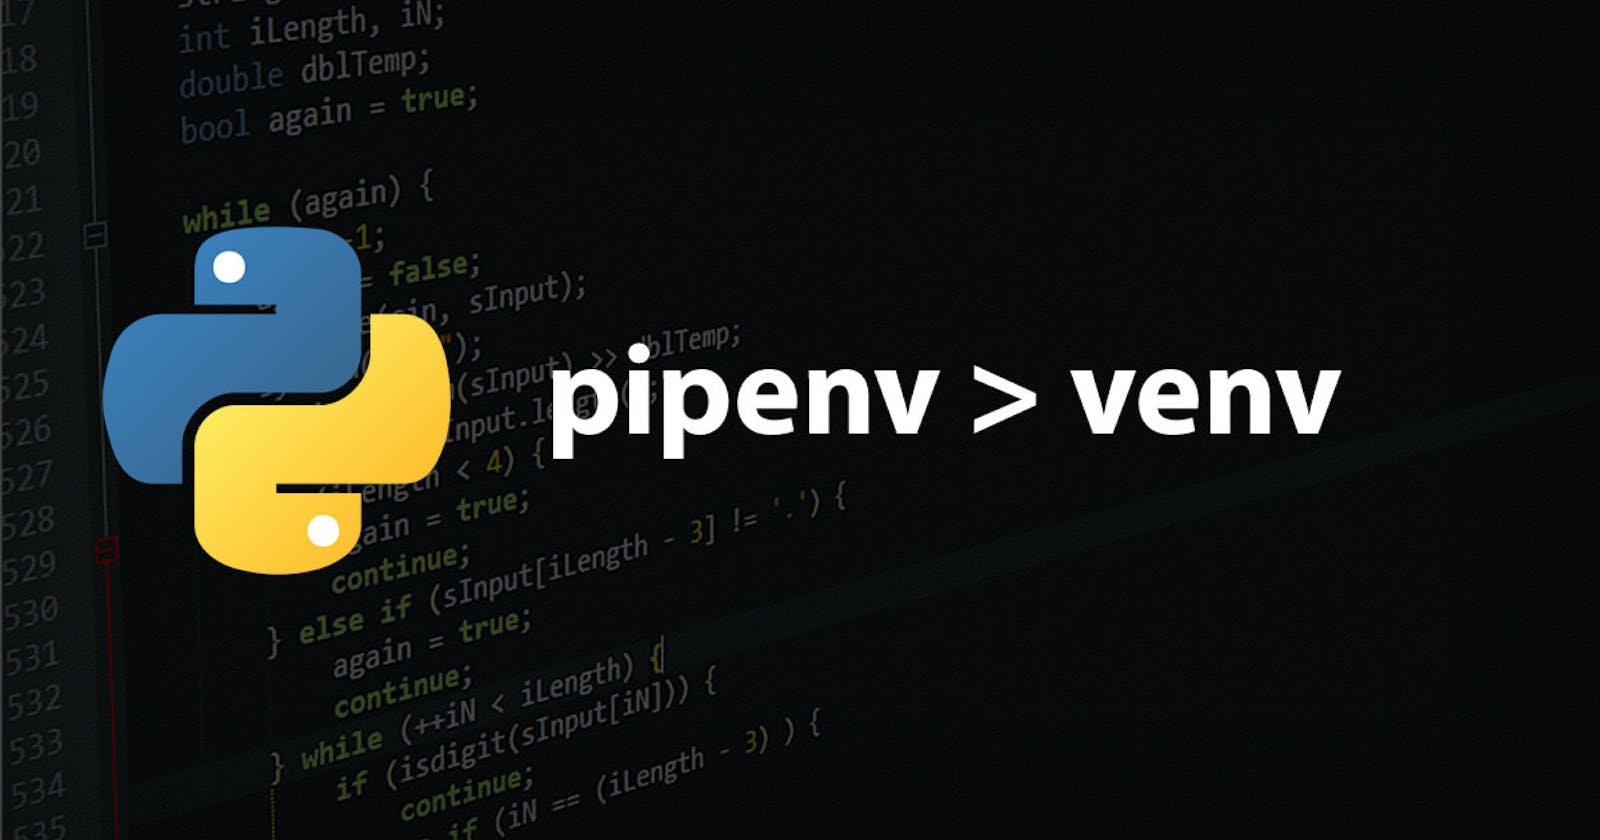 How to work with Python's normal venv and pipenv simultaneously